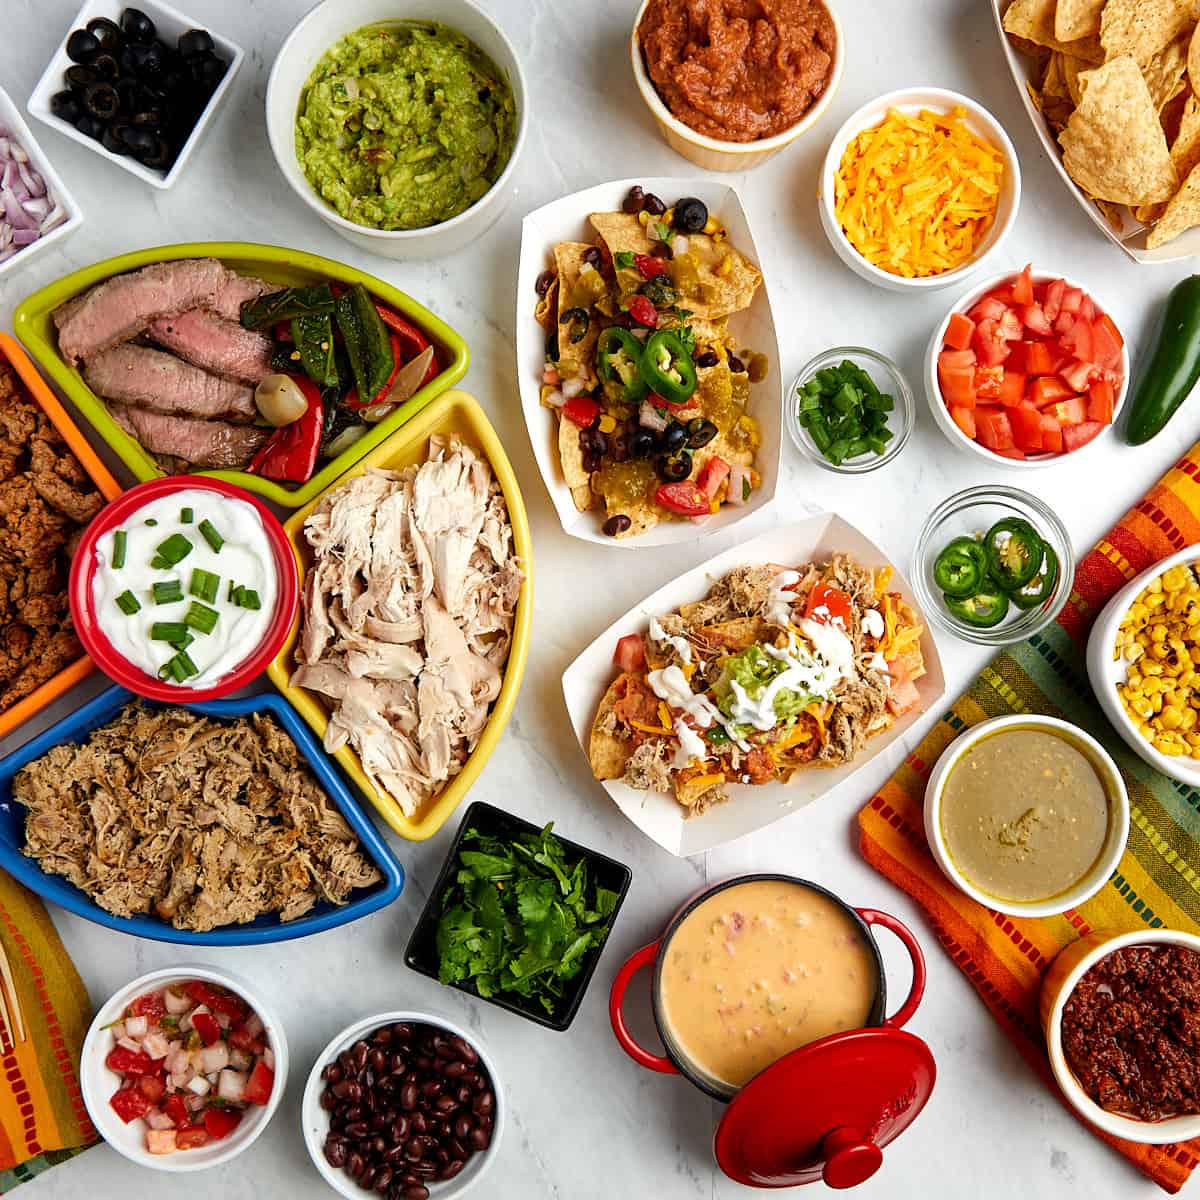 nacho bar toppings in serving containers and two servings of nachos topped with toppings